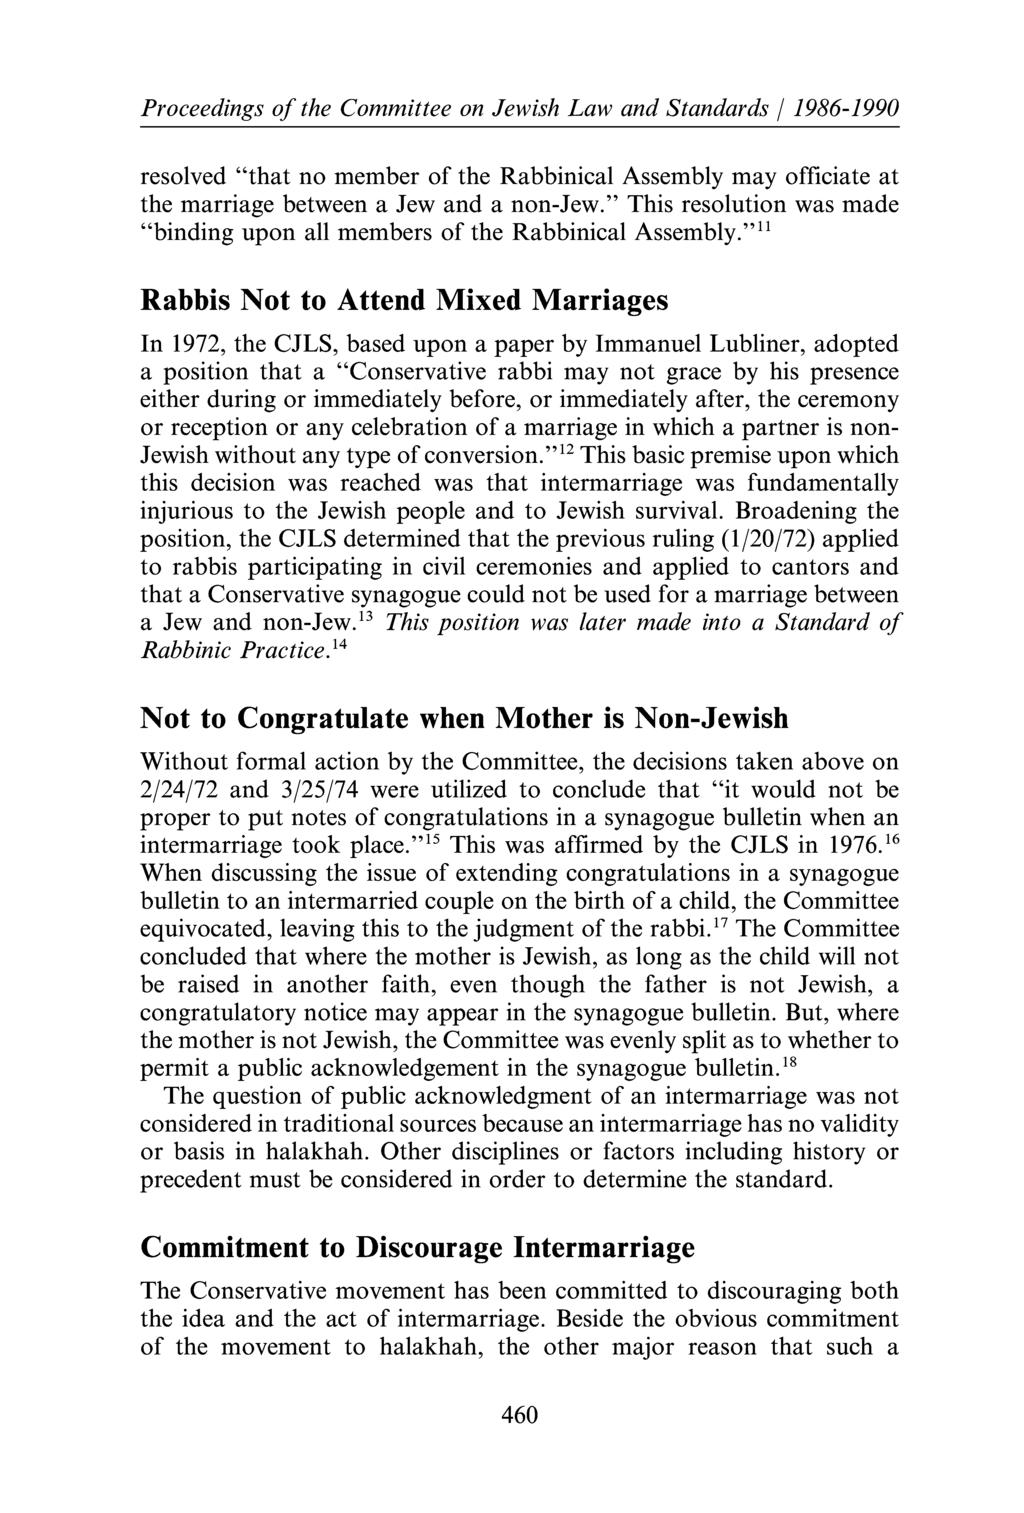 Proceedings of the Committee on Jewish Law and Standards/ 1986-1990 resolved "that no member of the Rabbinical Assembly may officiate at the marriage between a Jew and a non-jew.